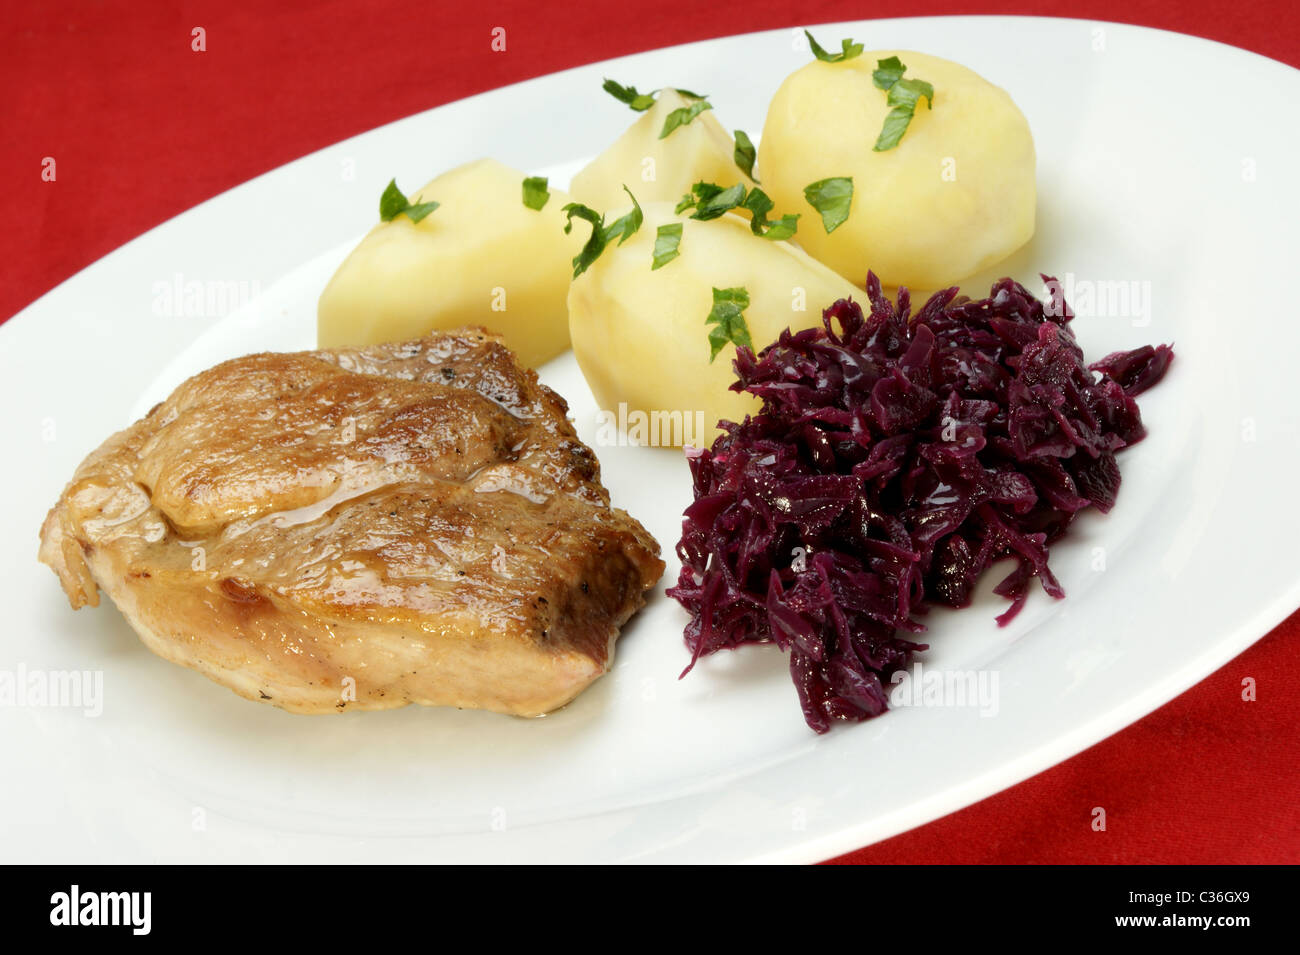 Pork roast with potatoes and red cabbage Stock Photo